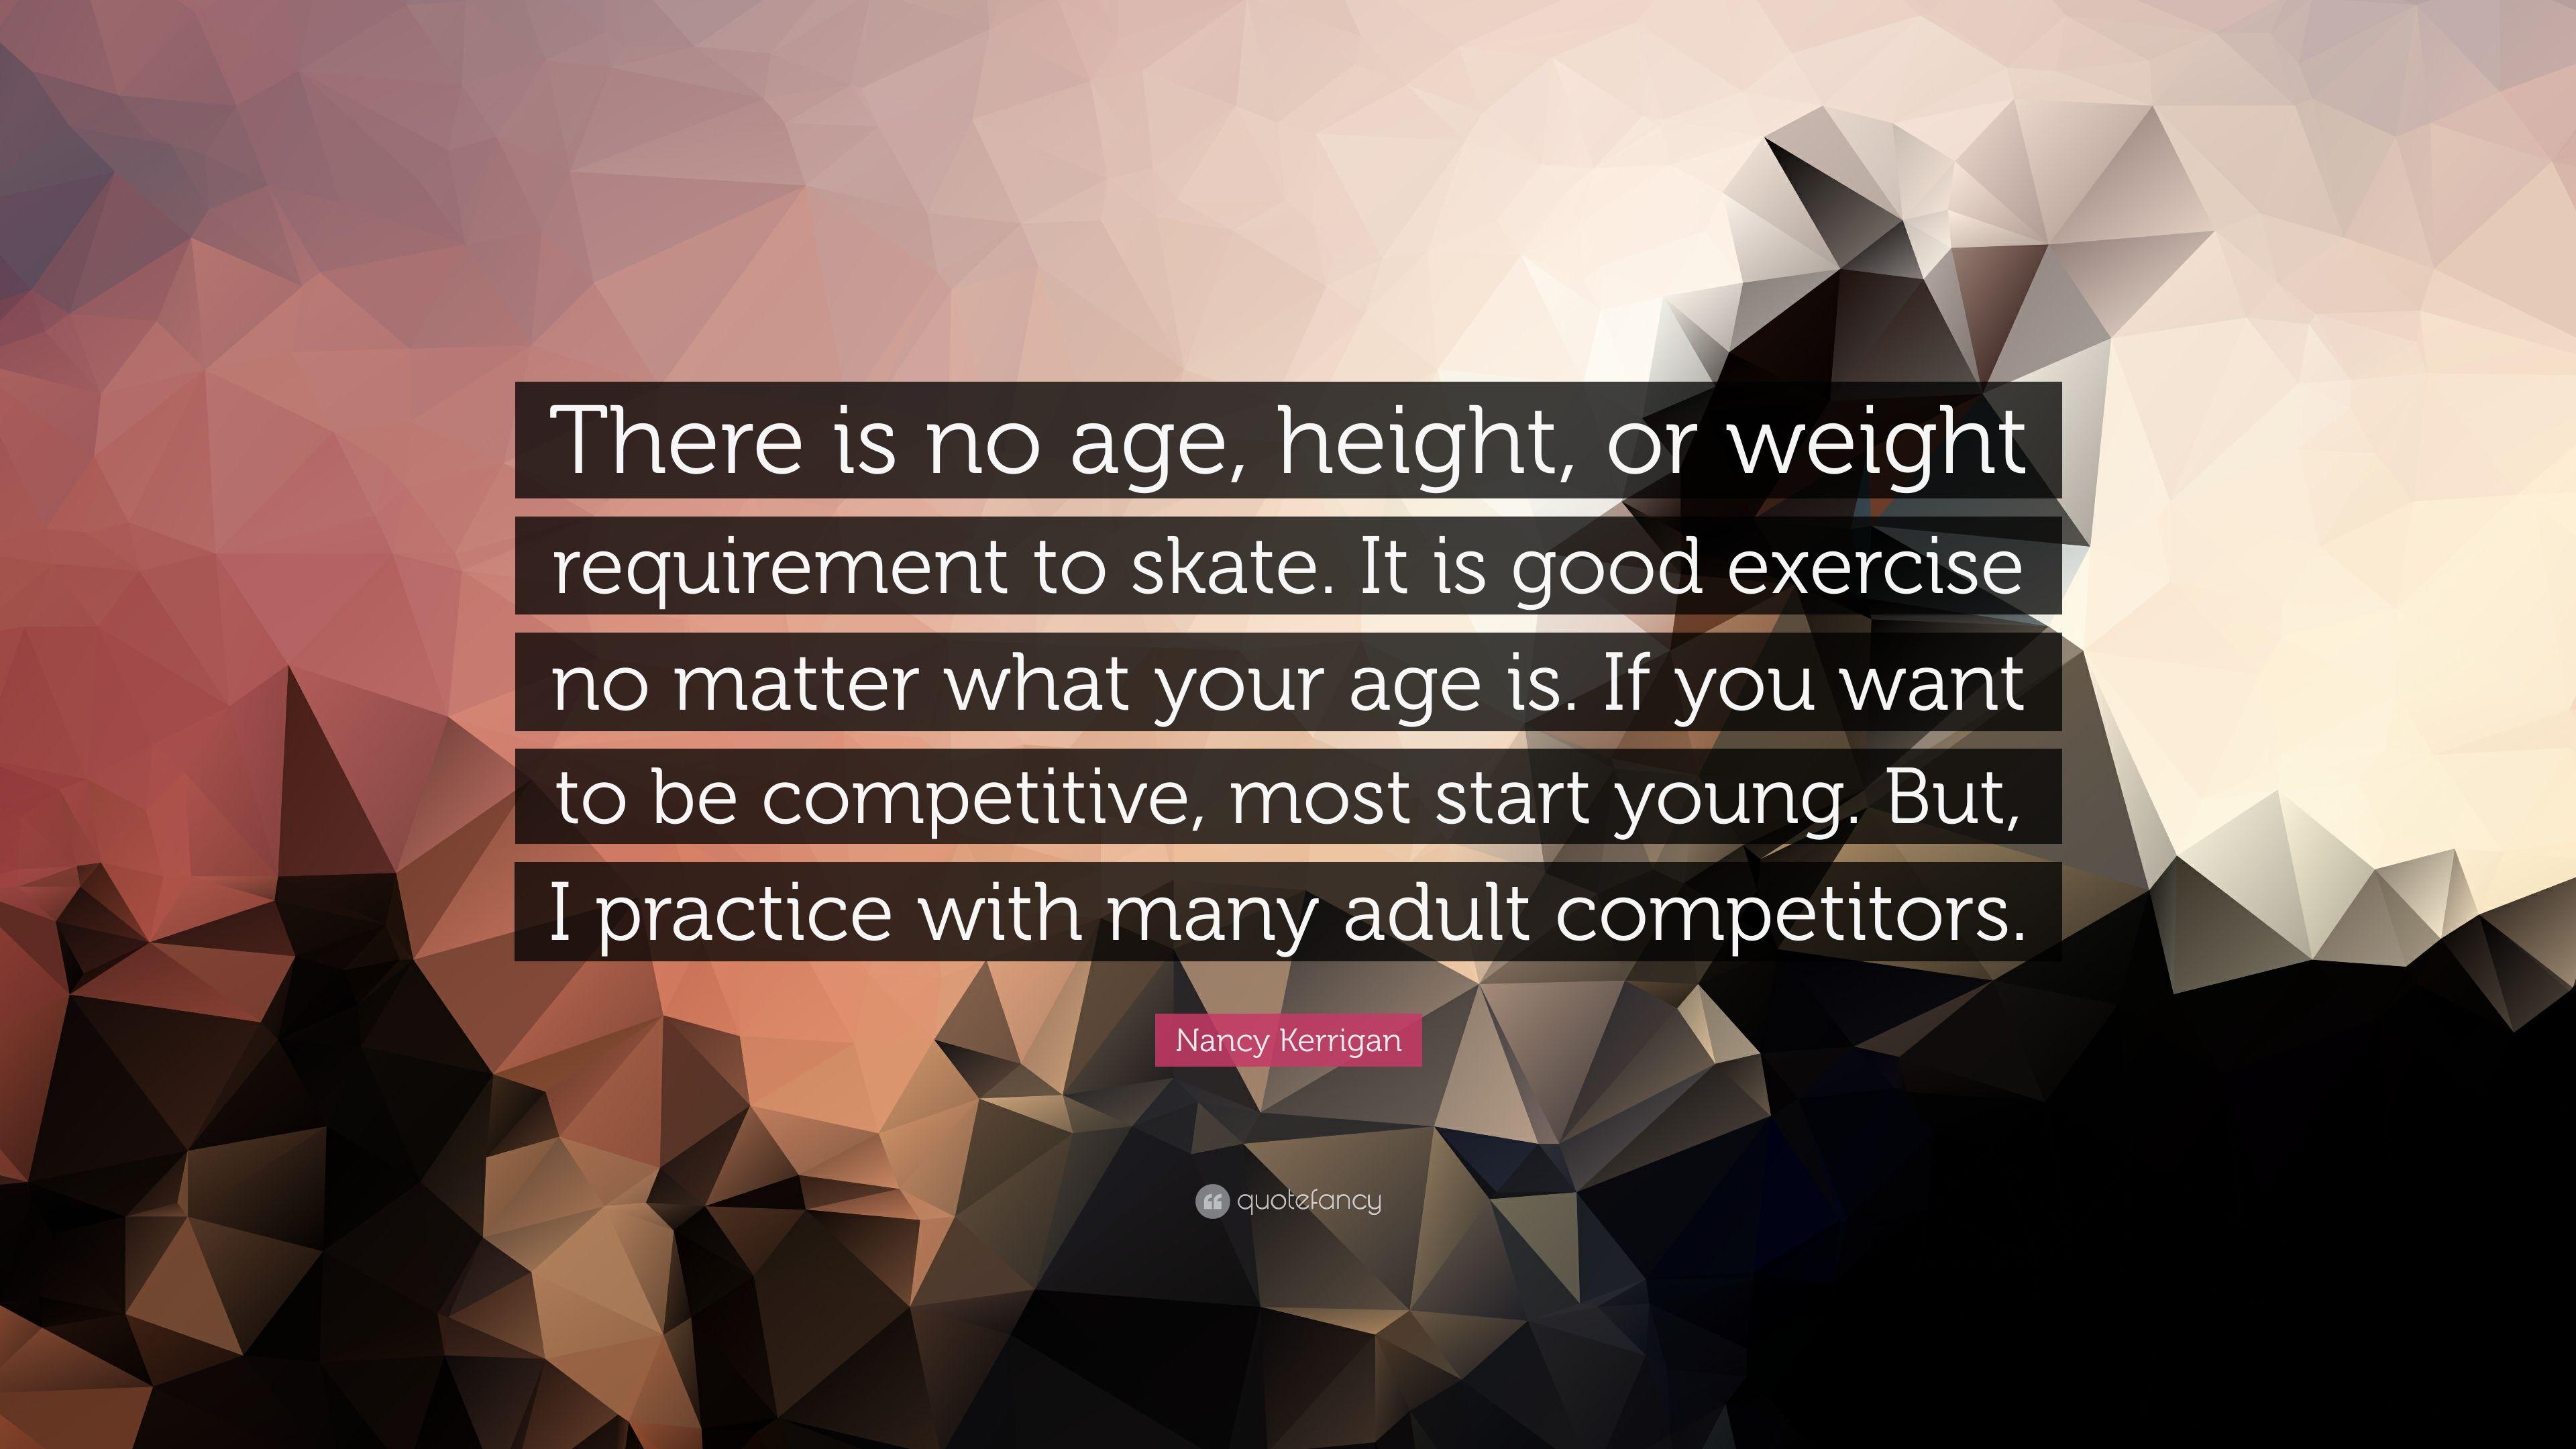 Nancy Kerrigan Quote: “There is no age, height, or weight